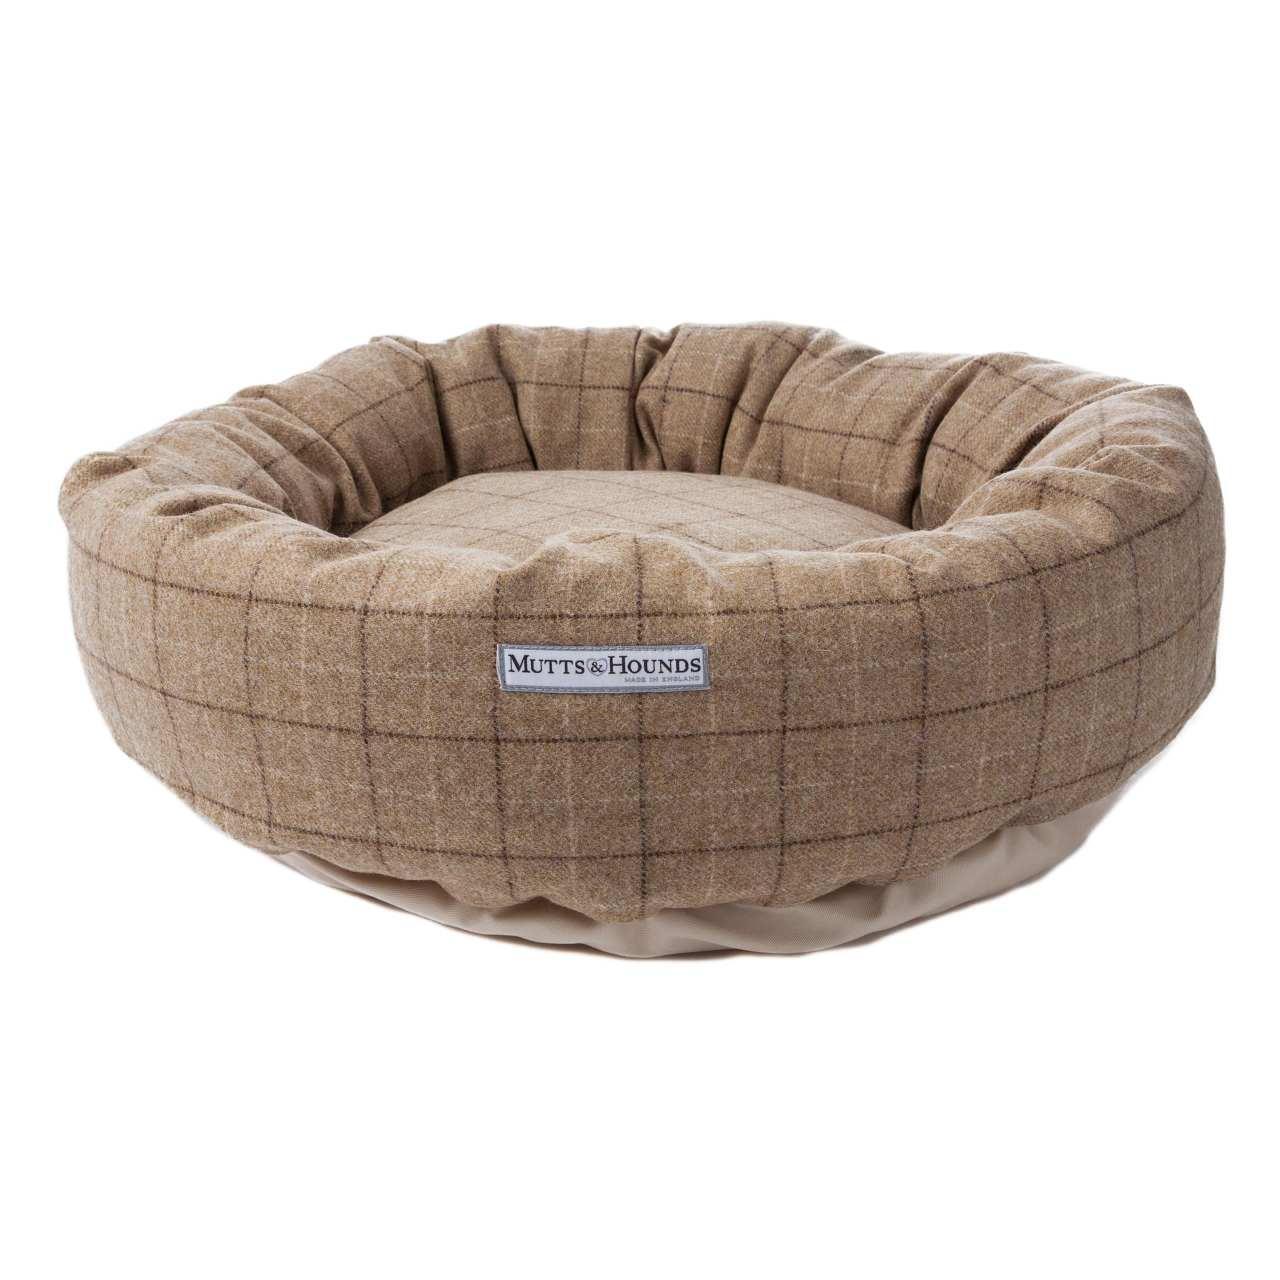 An image of Mutts & Hounds Oatmeal Tweed Donut Bed Small